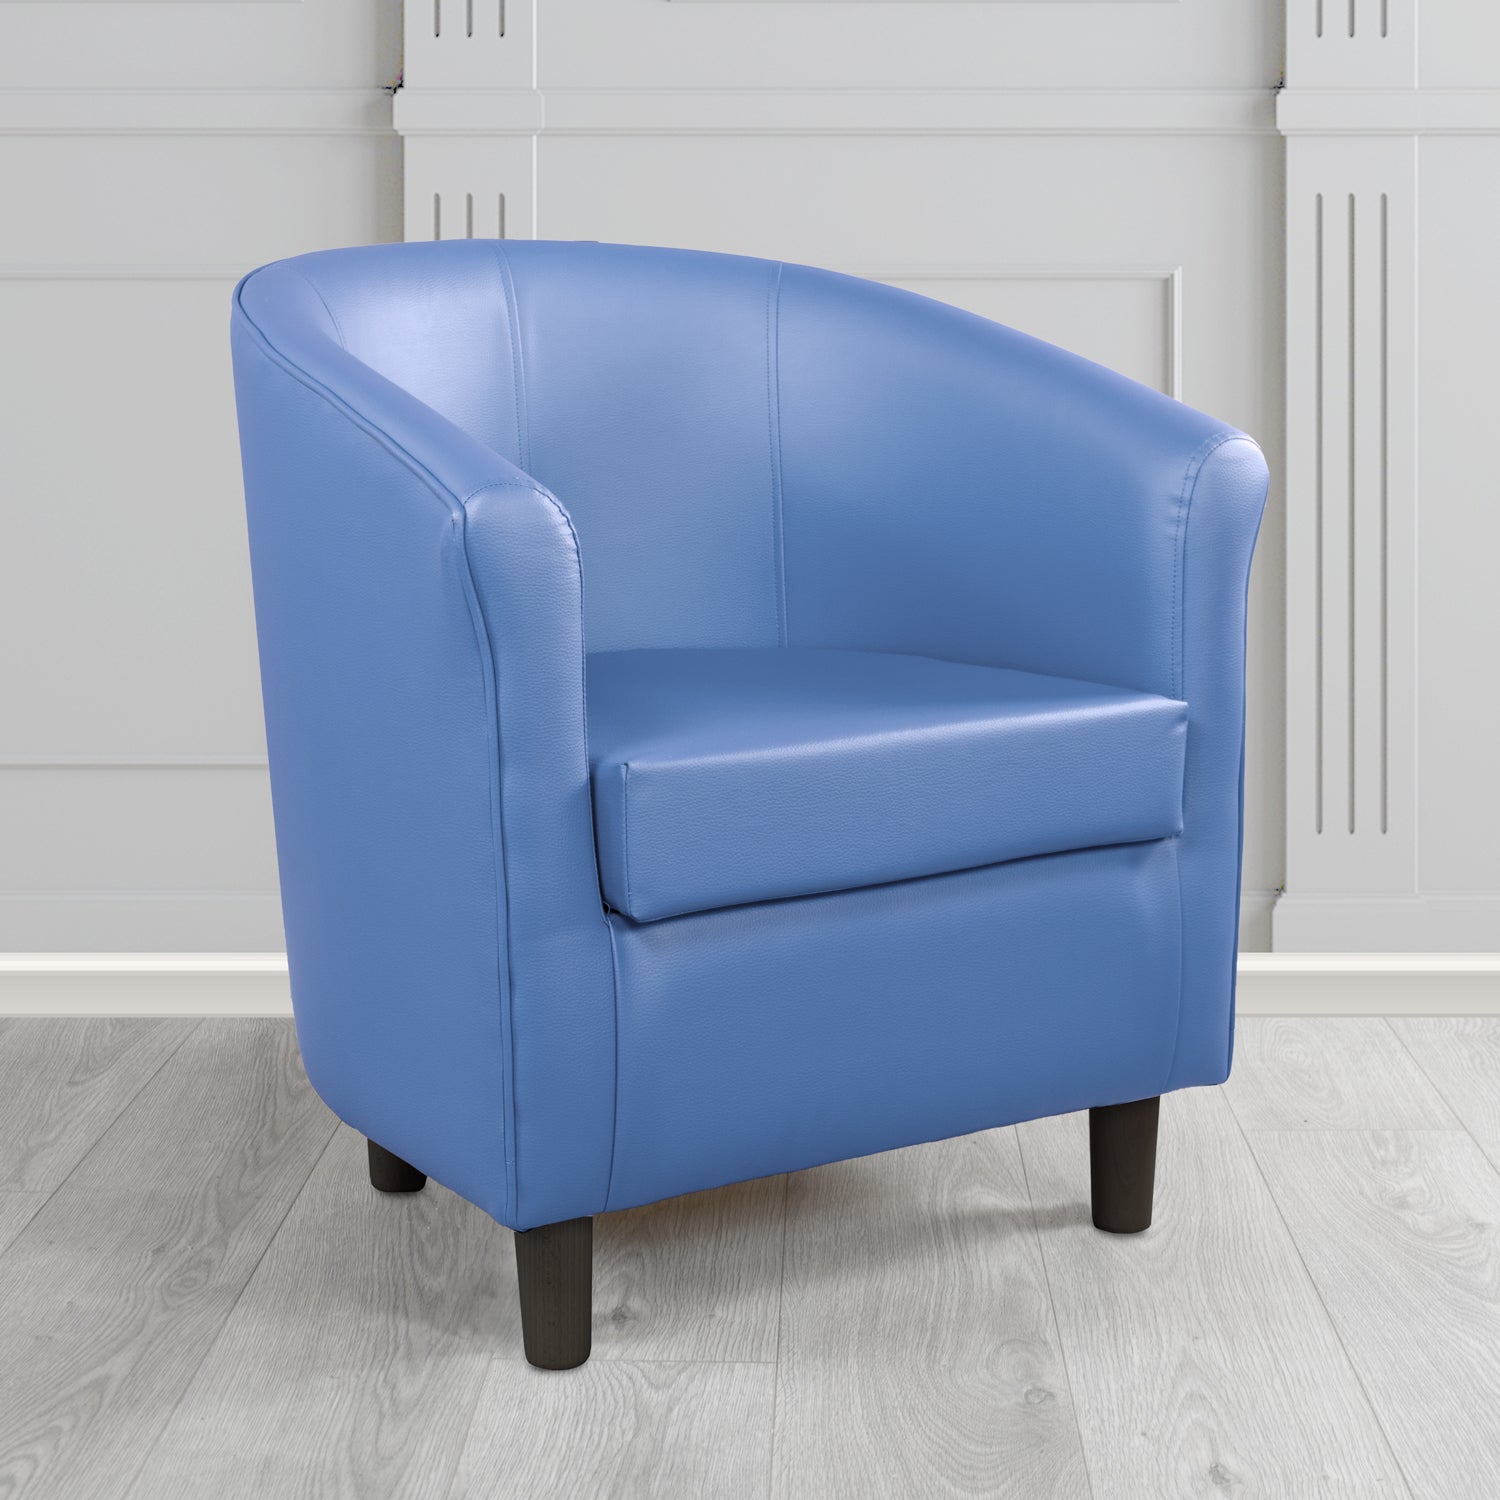 Tuscany Just Colour Blue Steel Antimicrobial Crib 5 Contract Faux Leather Tub Chair